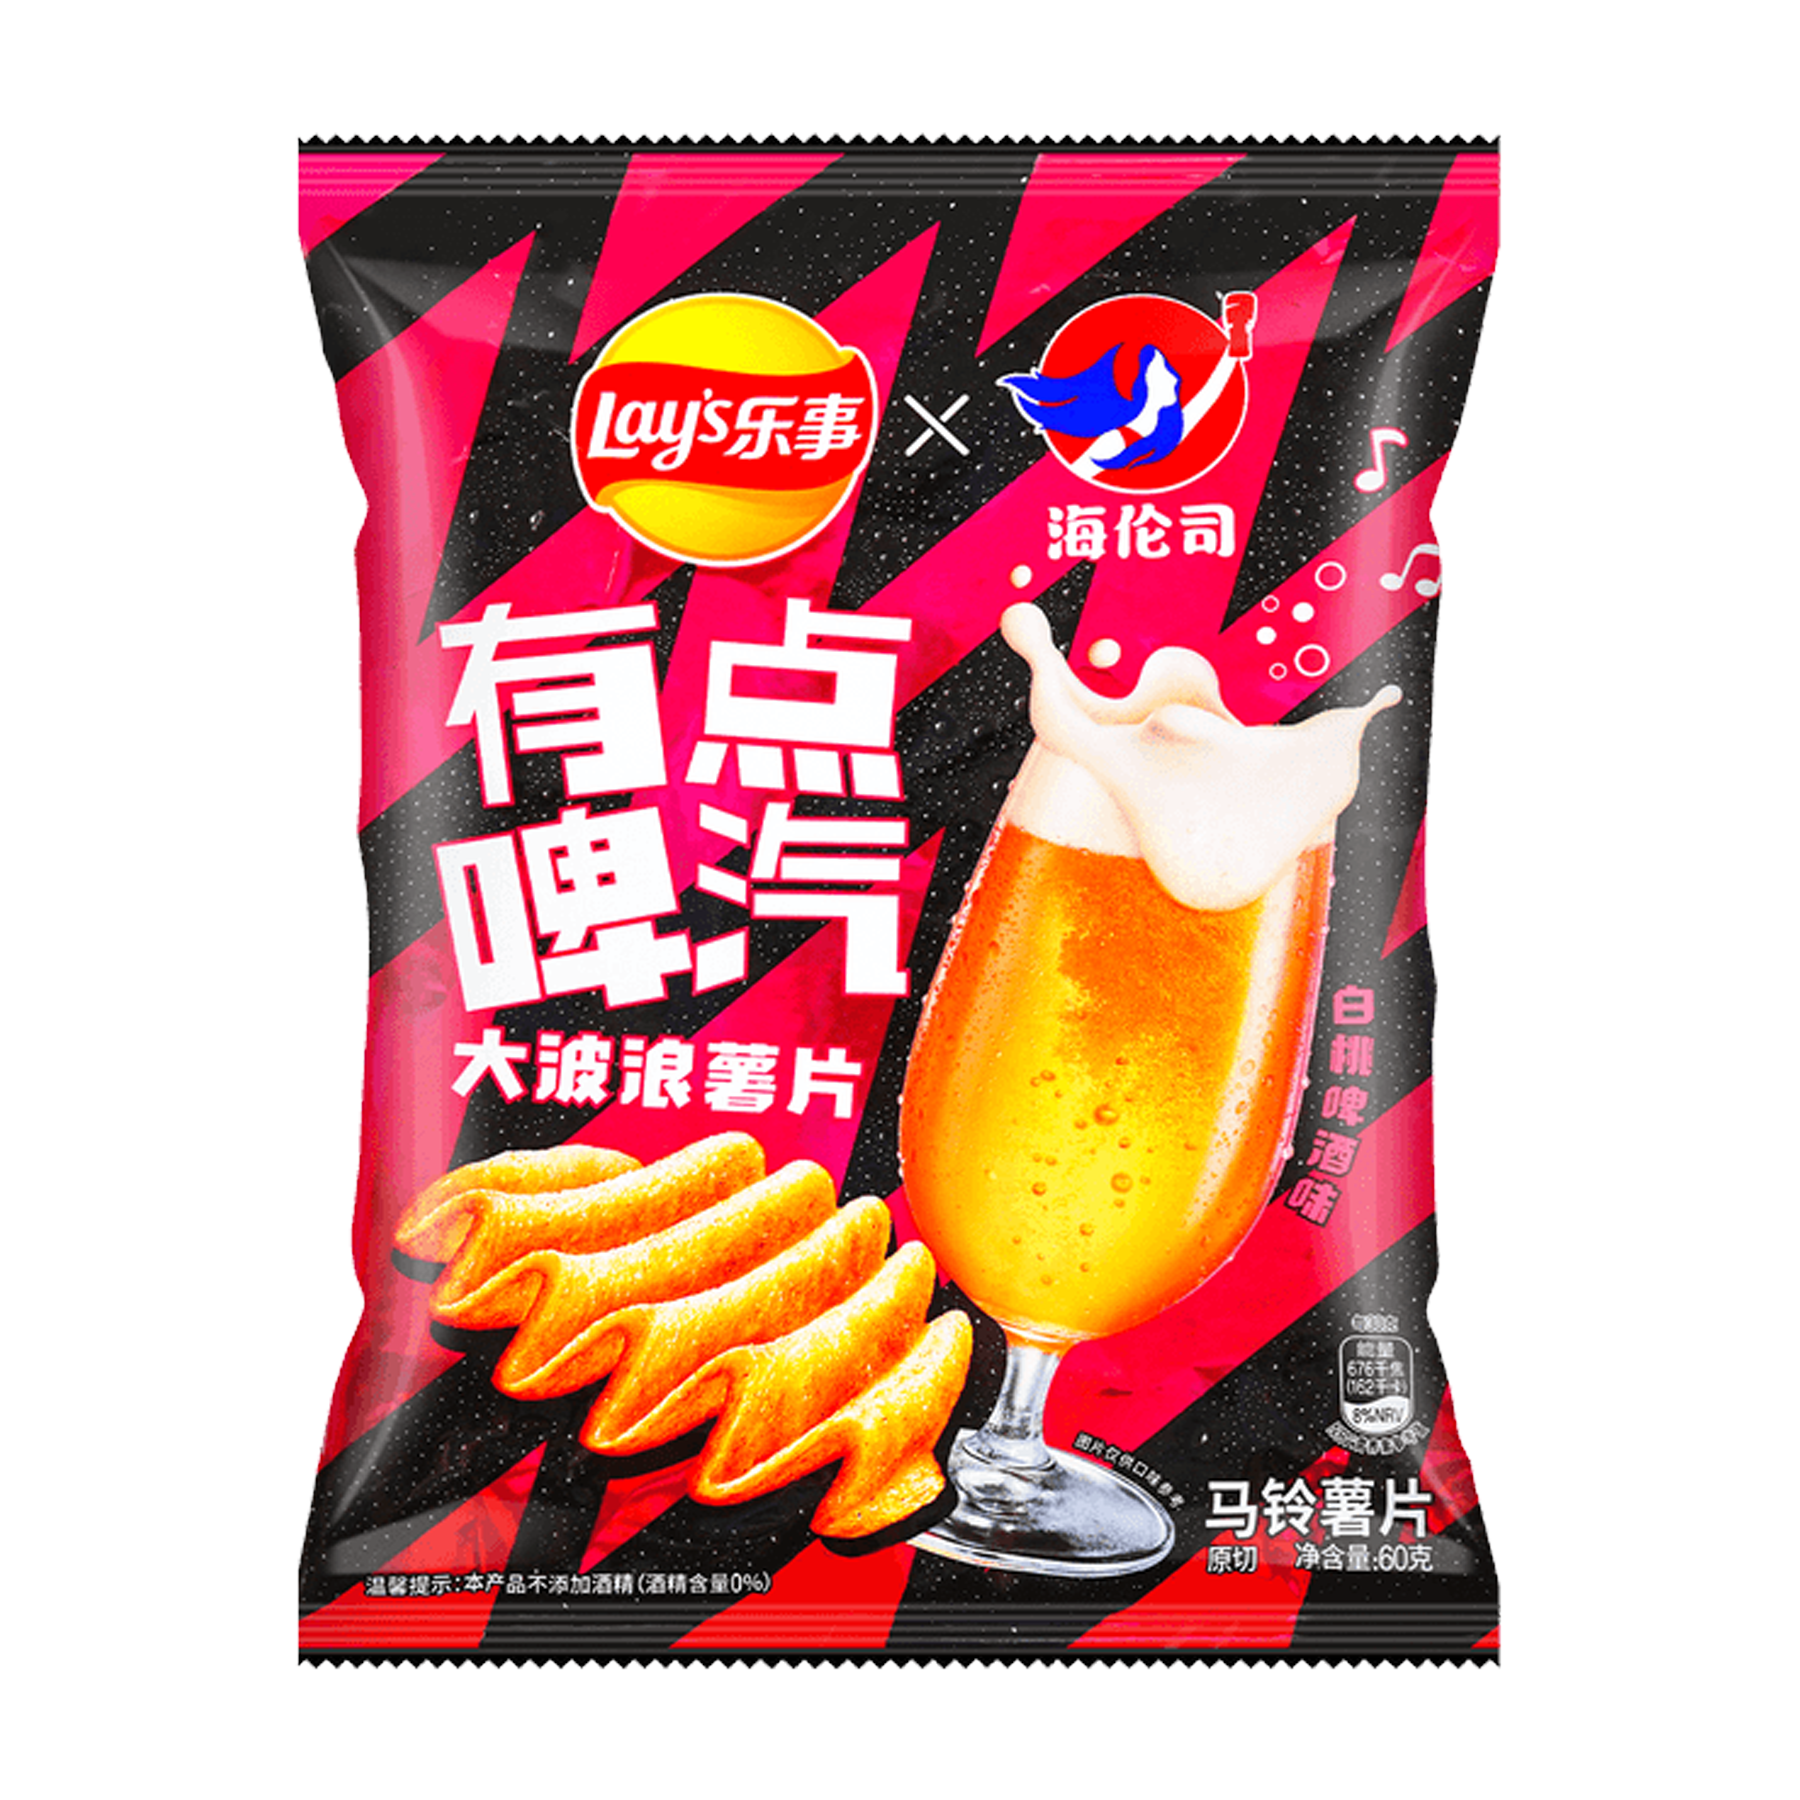 Lays White Peach Beer Flavored Wavy Chips